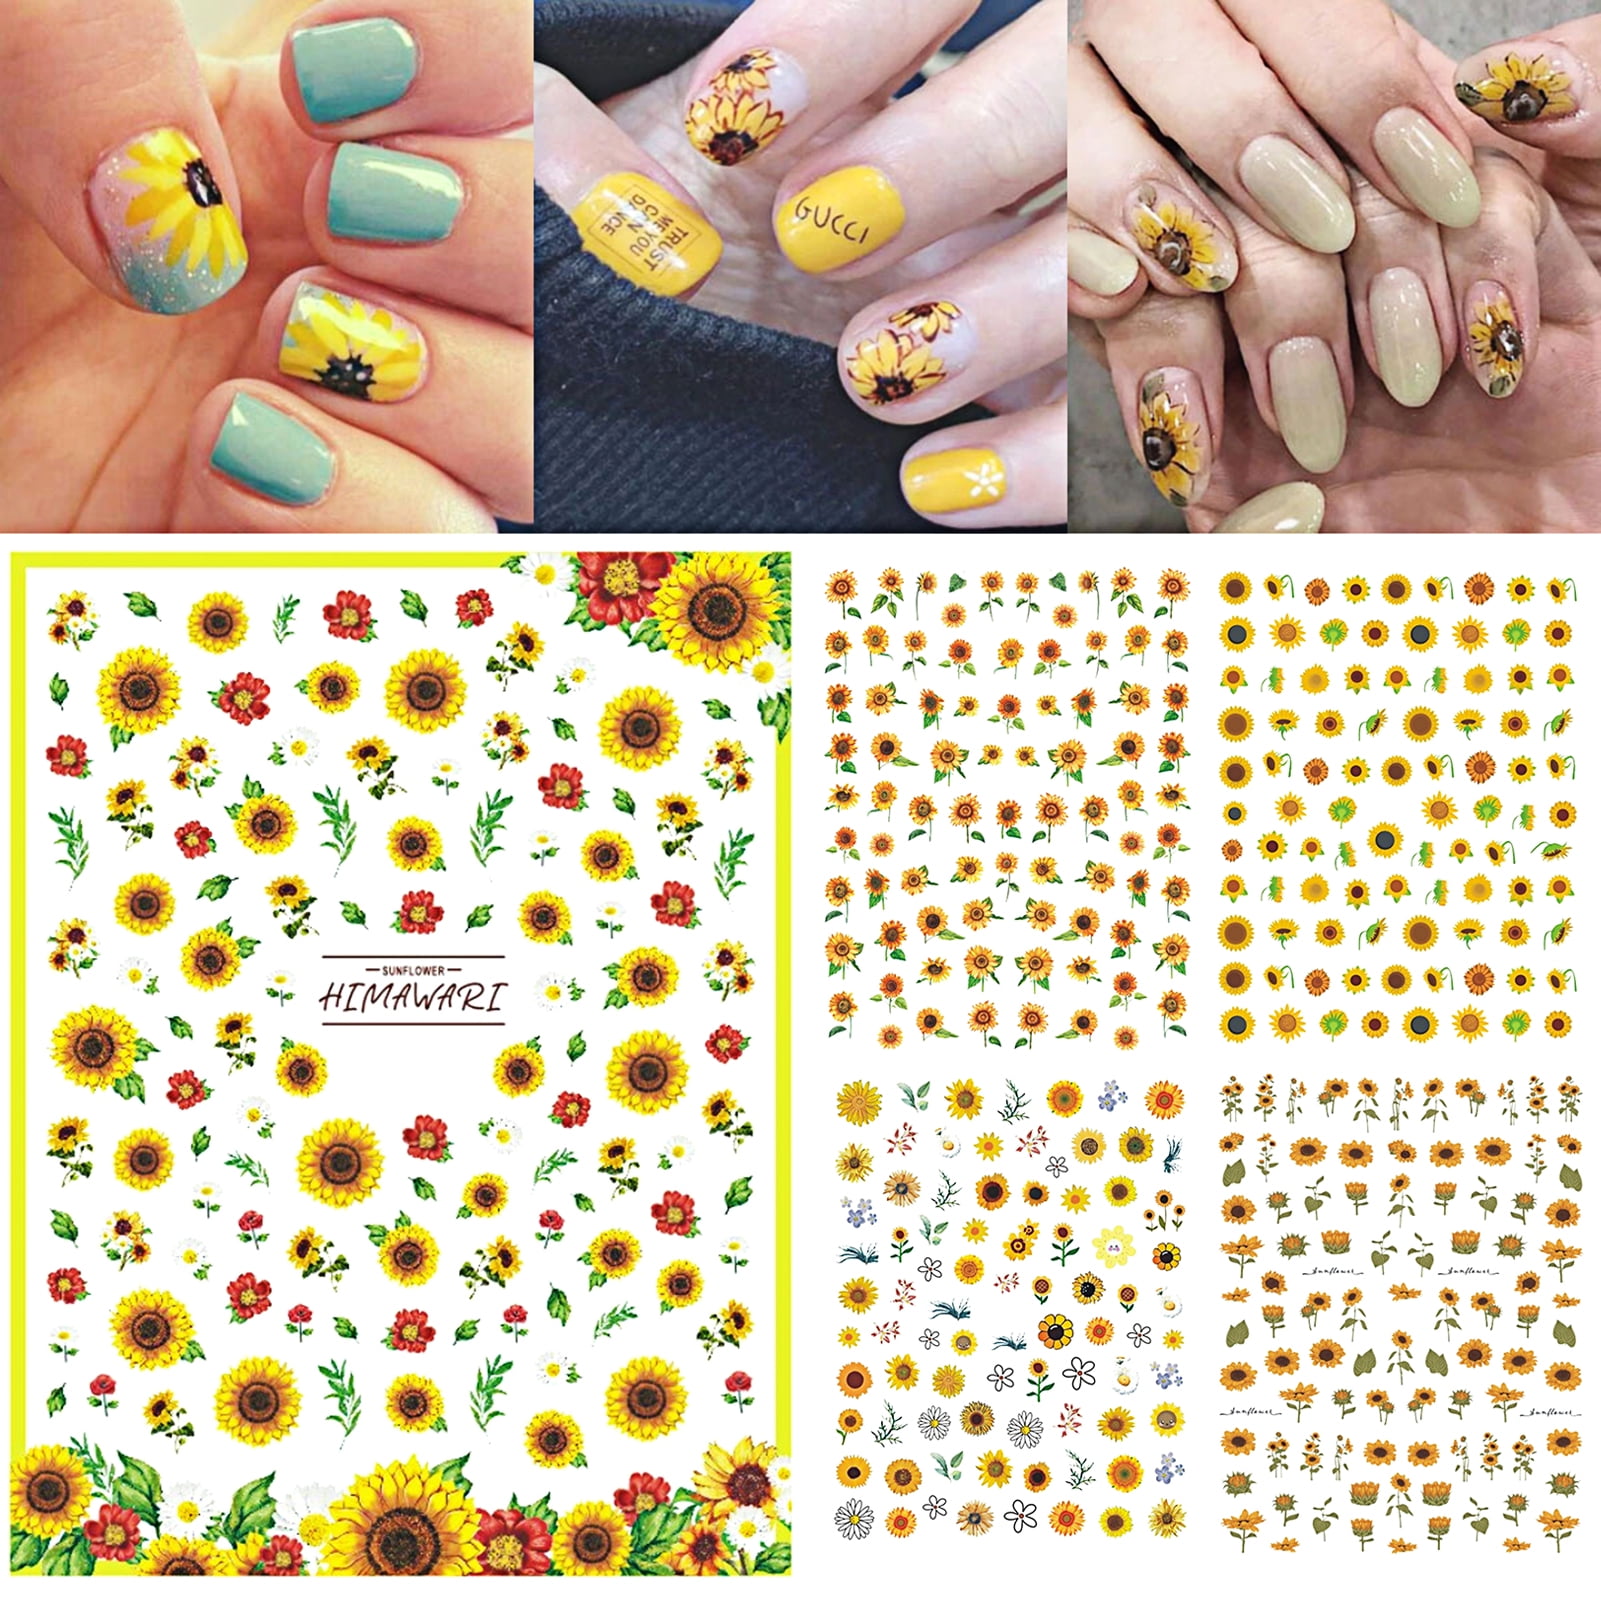 10 Sunflower Nail Ideas to Carry Summertime In Your Hands – ADVEKET